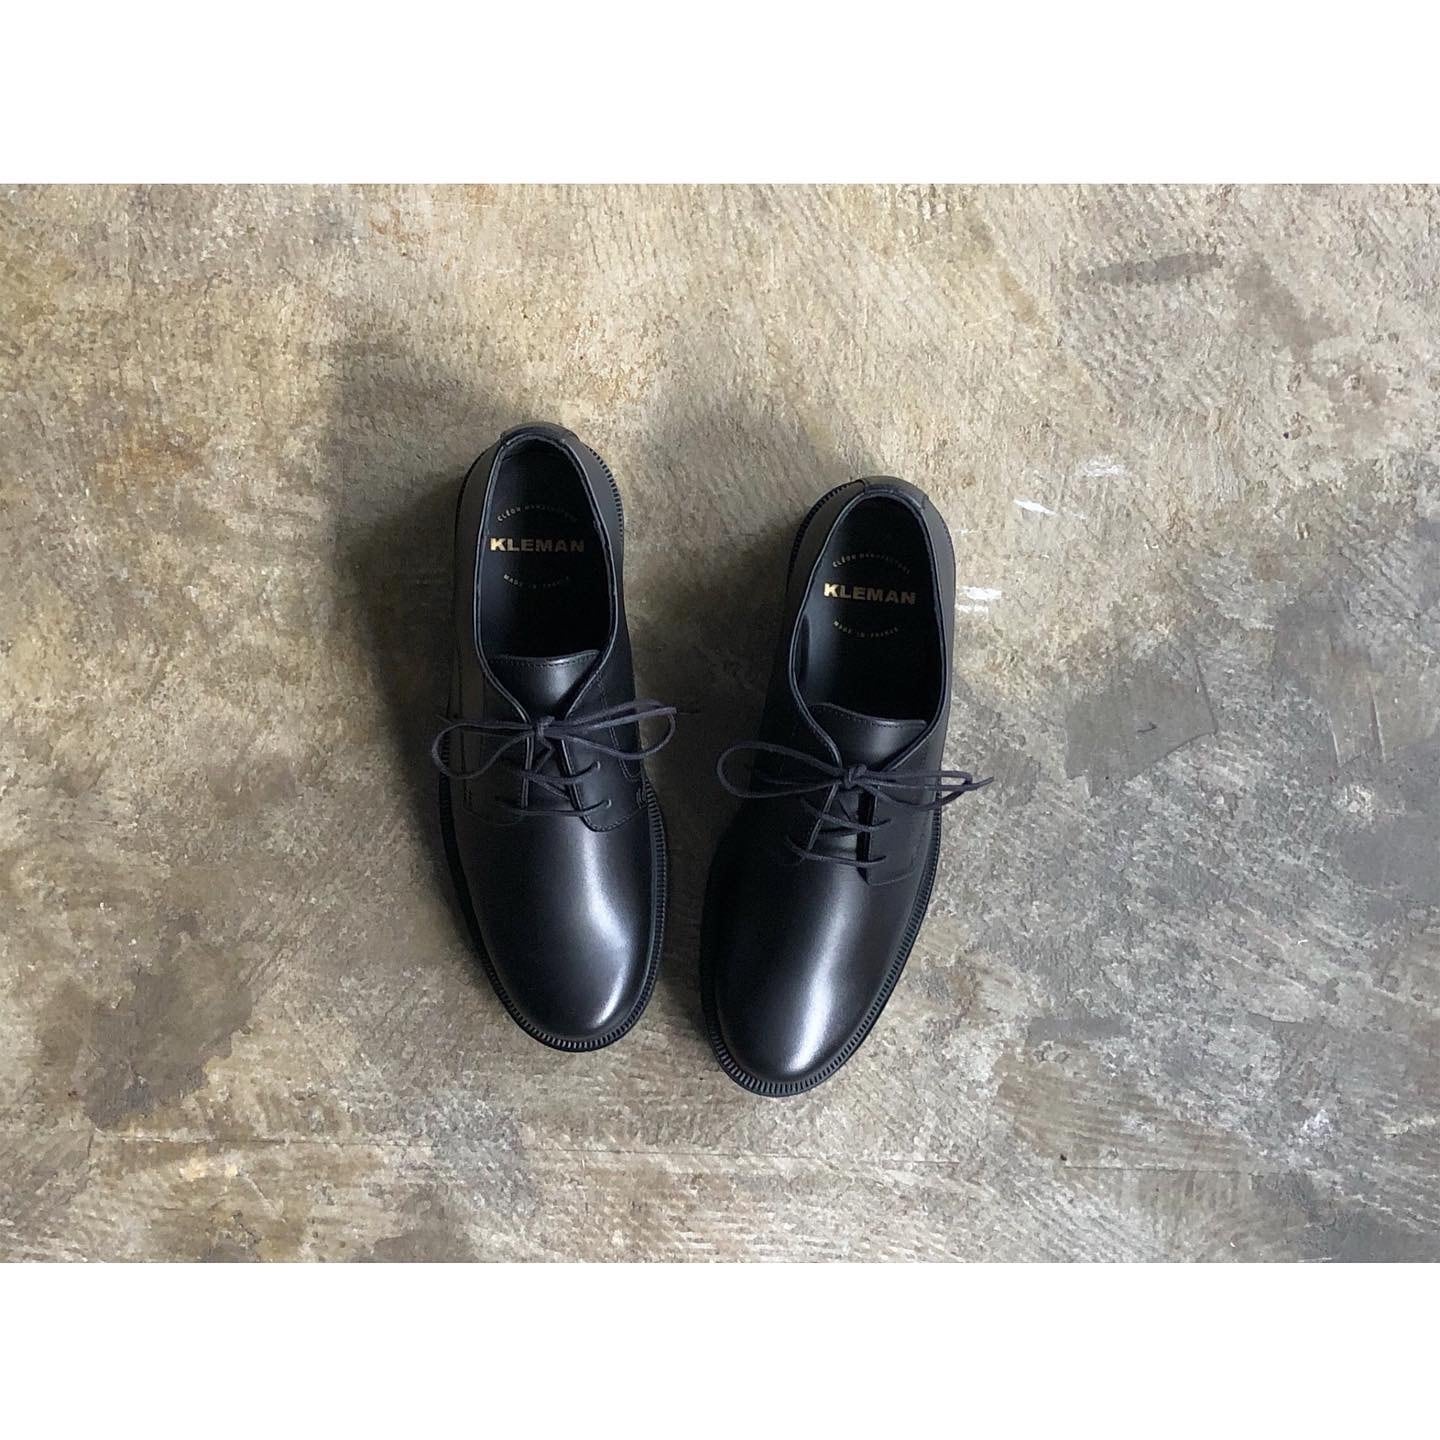 KLEMAN(クレマン) 『DANOR WOMENS』Plane Toe Leather Shoes | AUTHENTIC Life Store